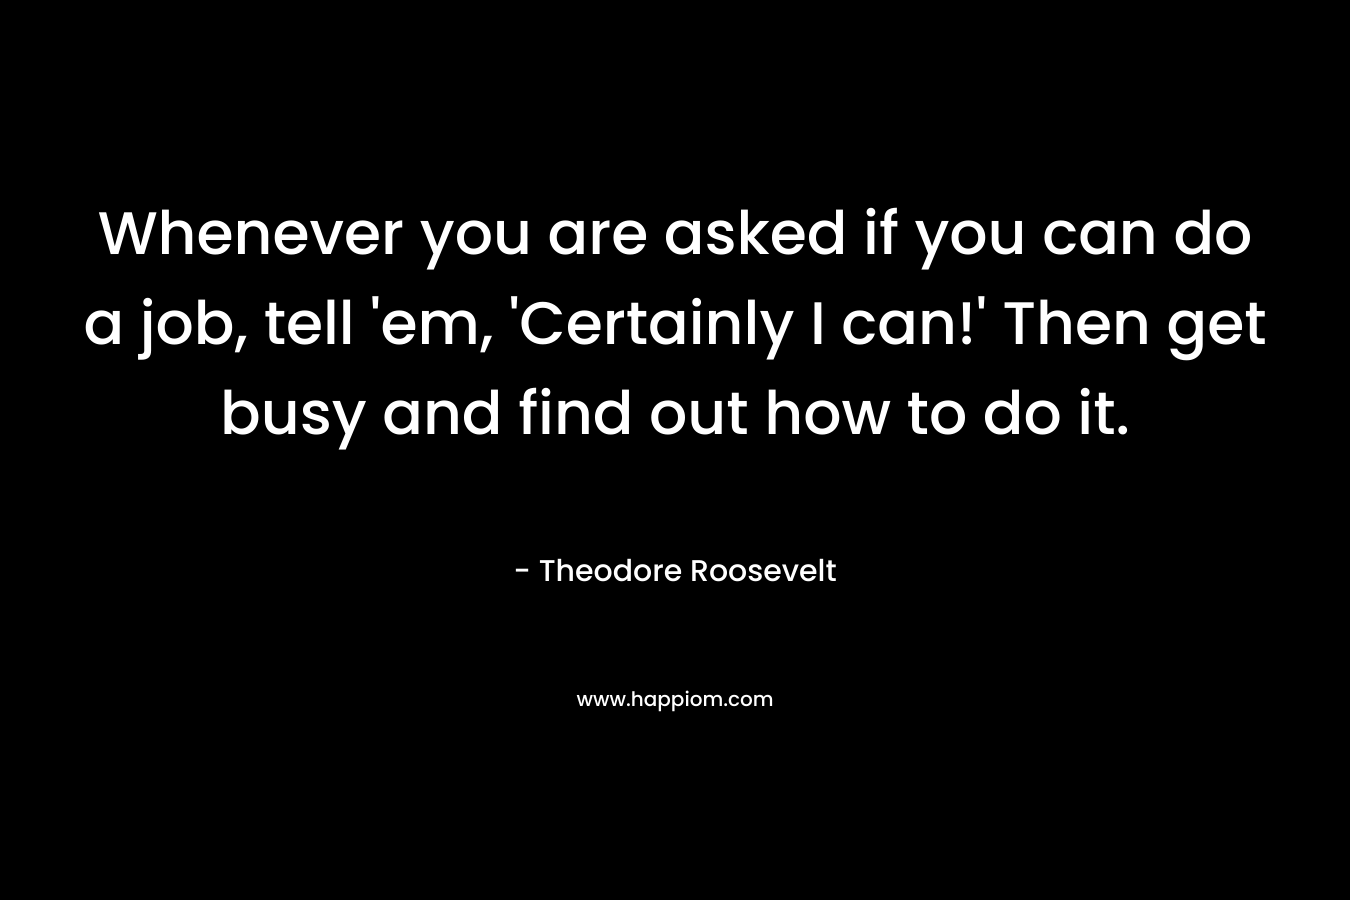 Whenever you are asked if you can do a job, tell 'em, 'Certainly I can!' Then get busy and find out how to do it.